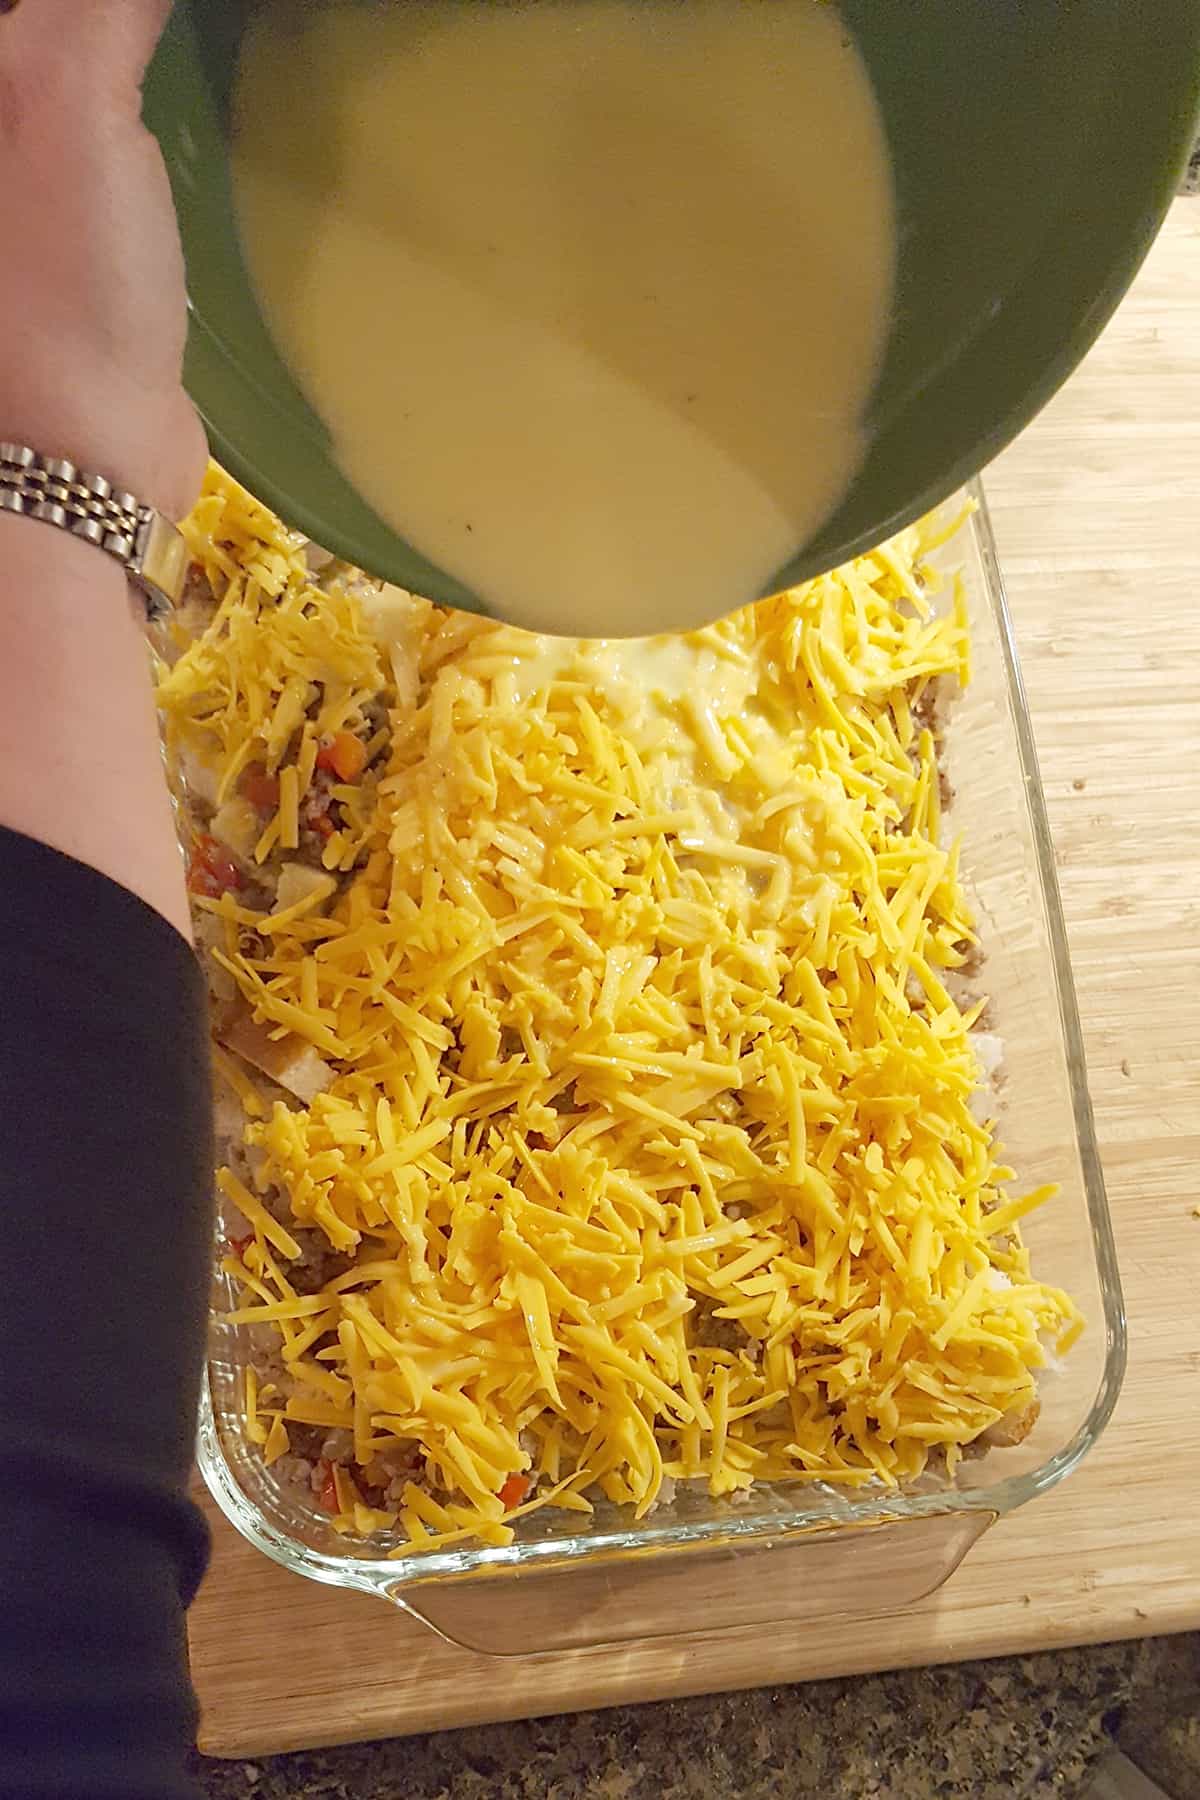 Milk and egg mixture in a mixing bowl being poured over the layered casserole.